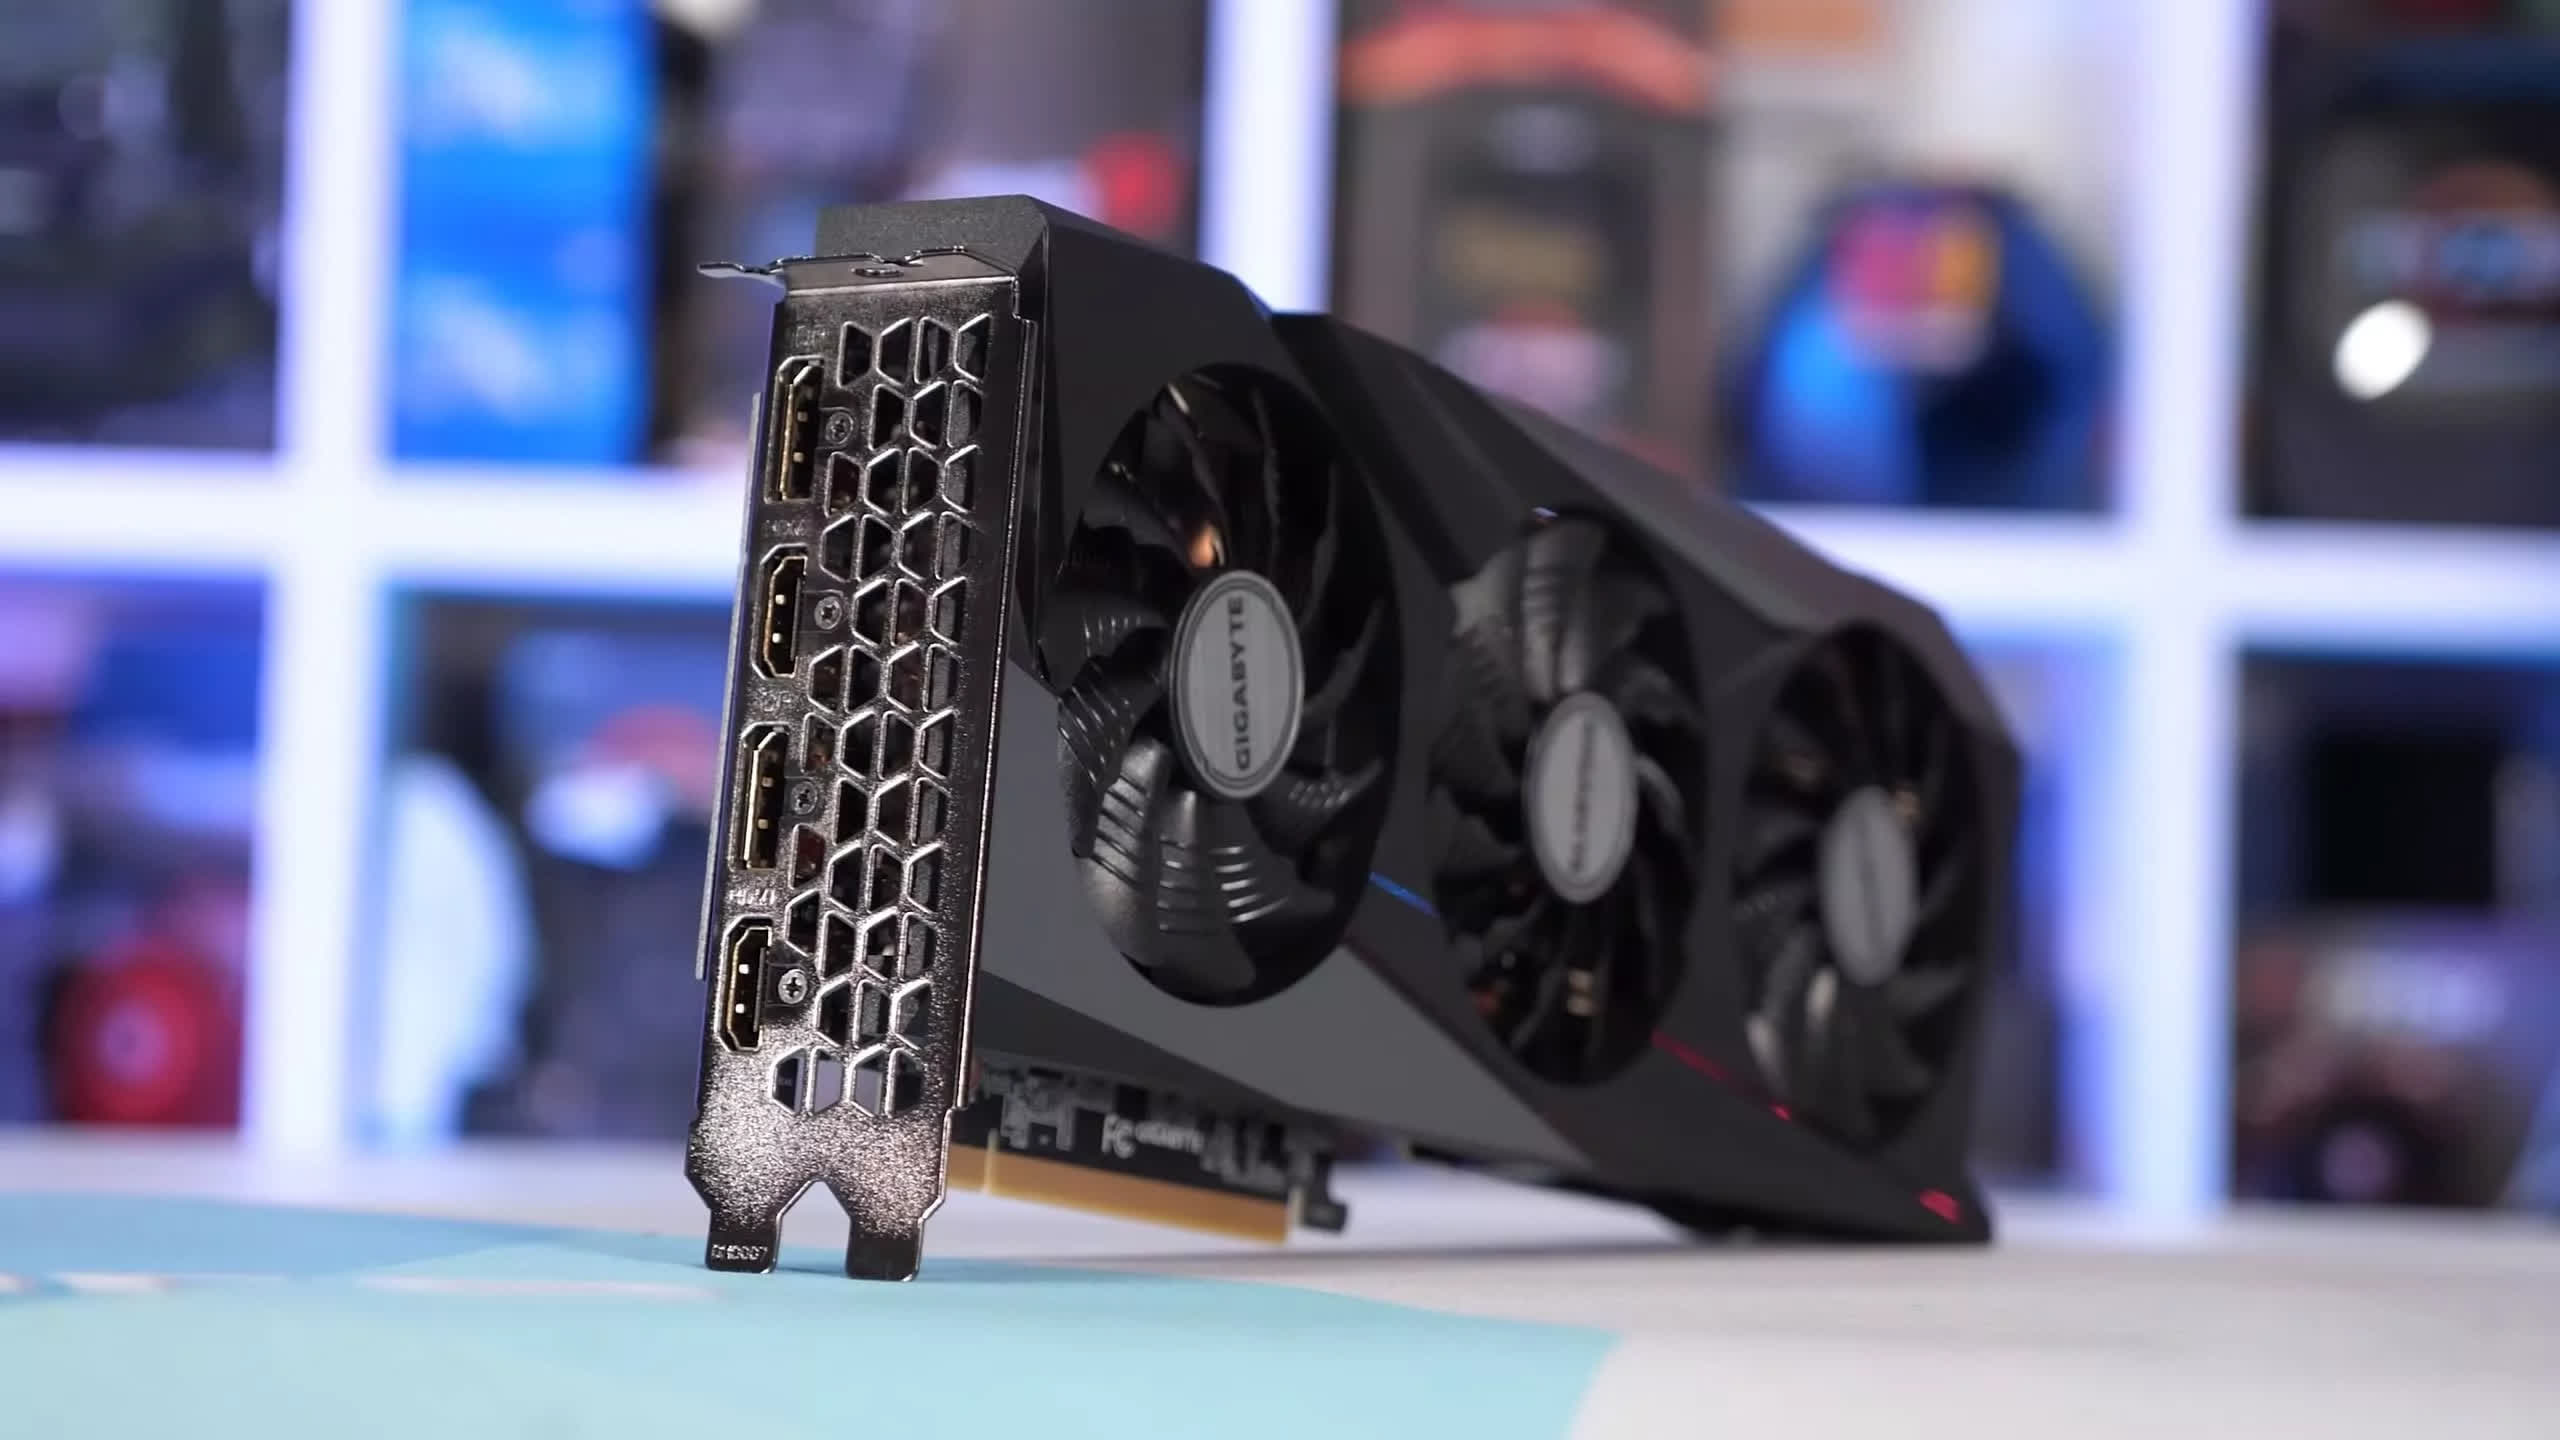 Latest Steam survey: cheaper graphics cards make largest gains, AMD CPUs lose more ground to Intel